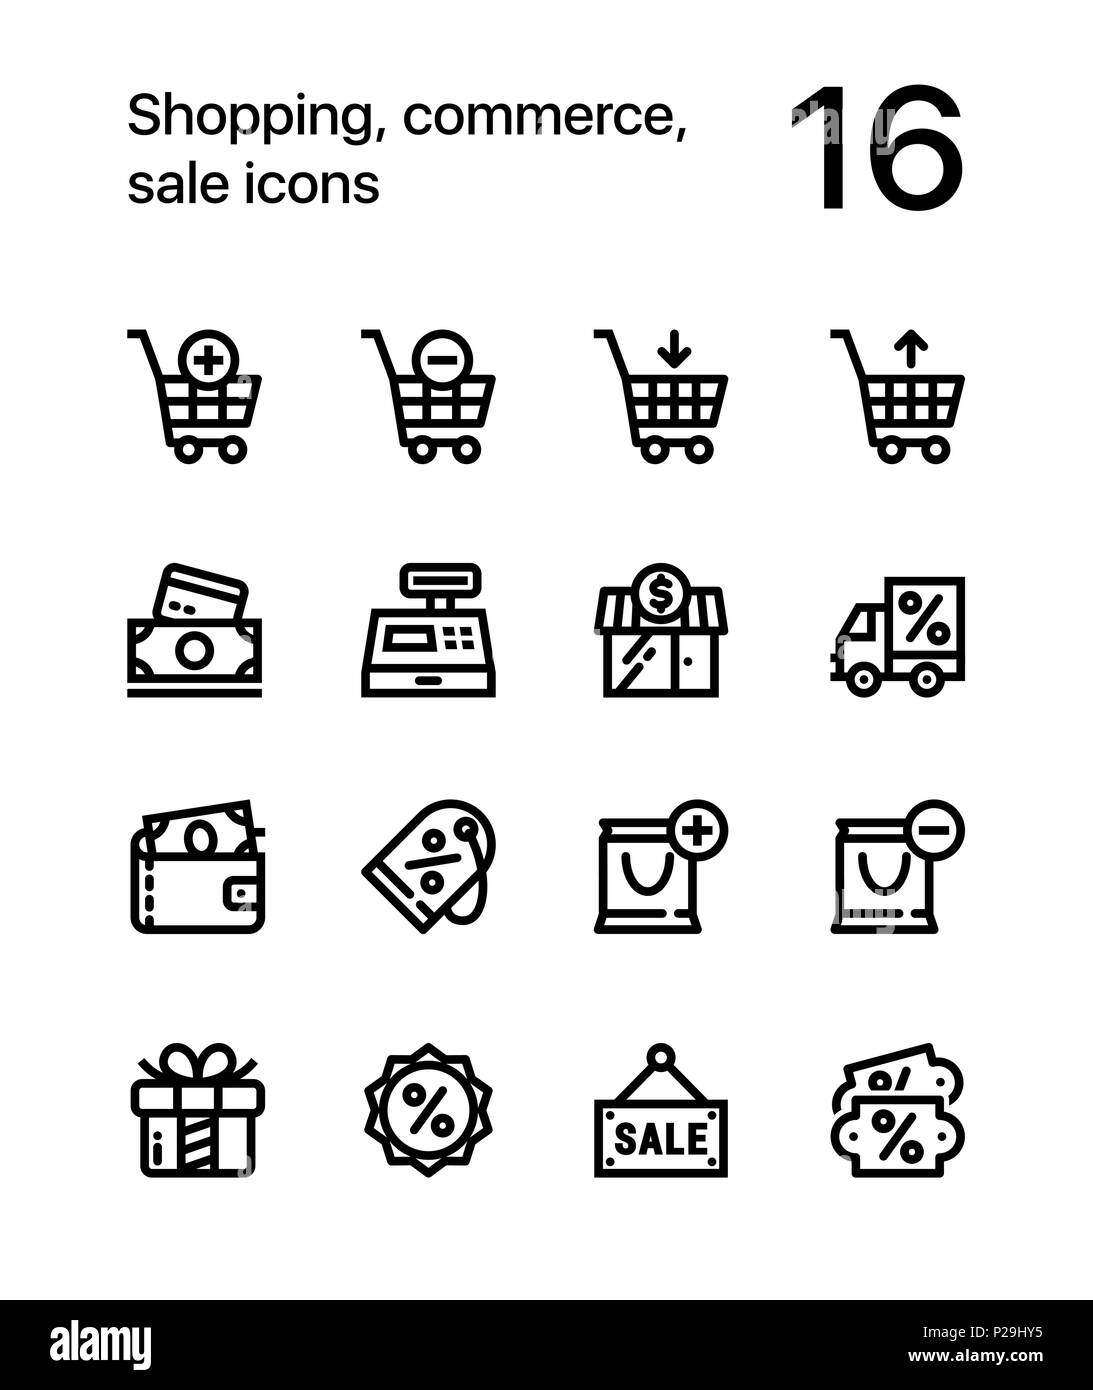 Shopping, commerce, sale icons for web and mobile design pack 1 Stock Vector